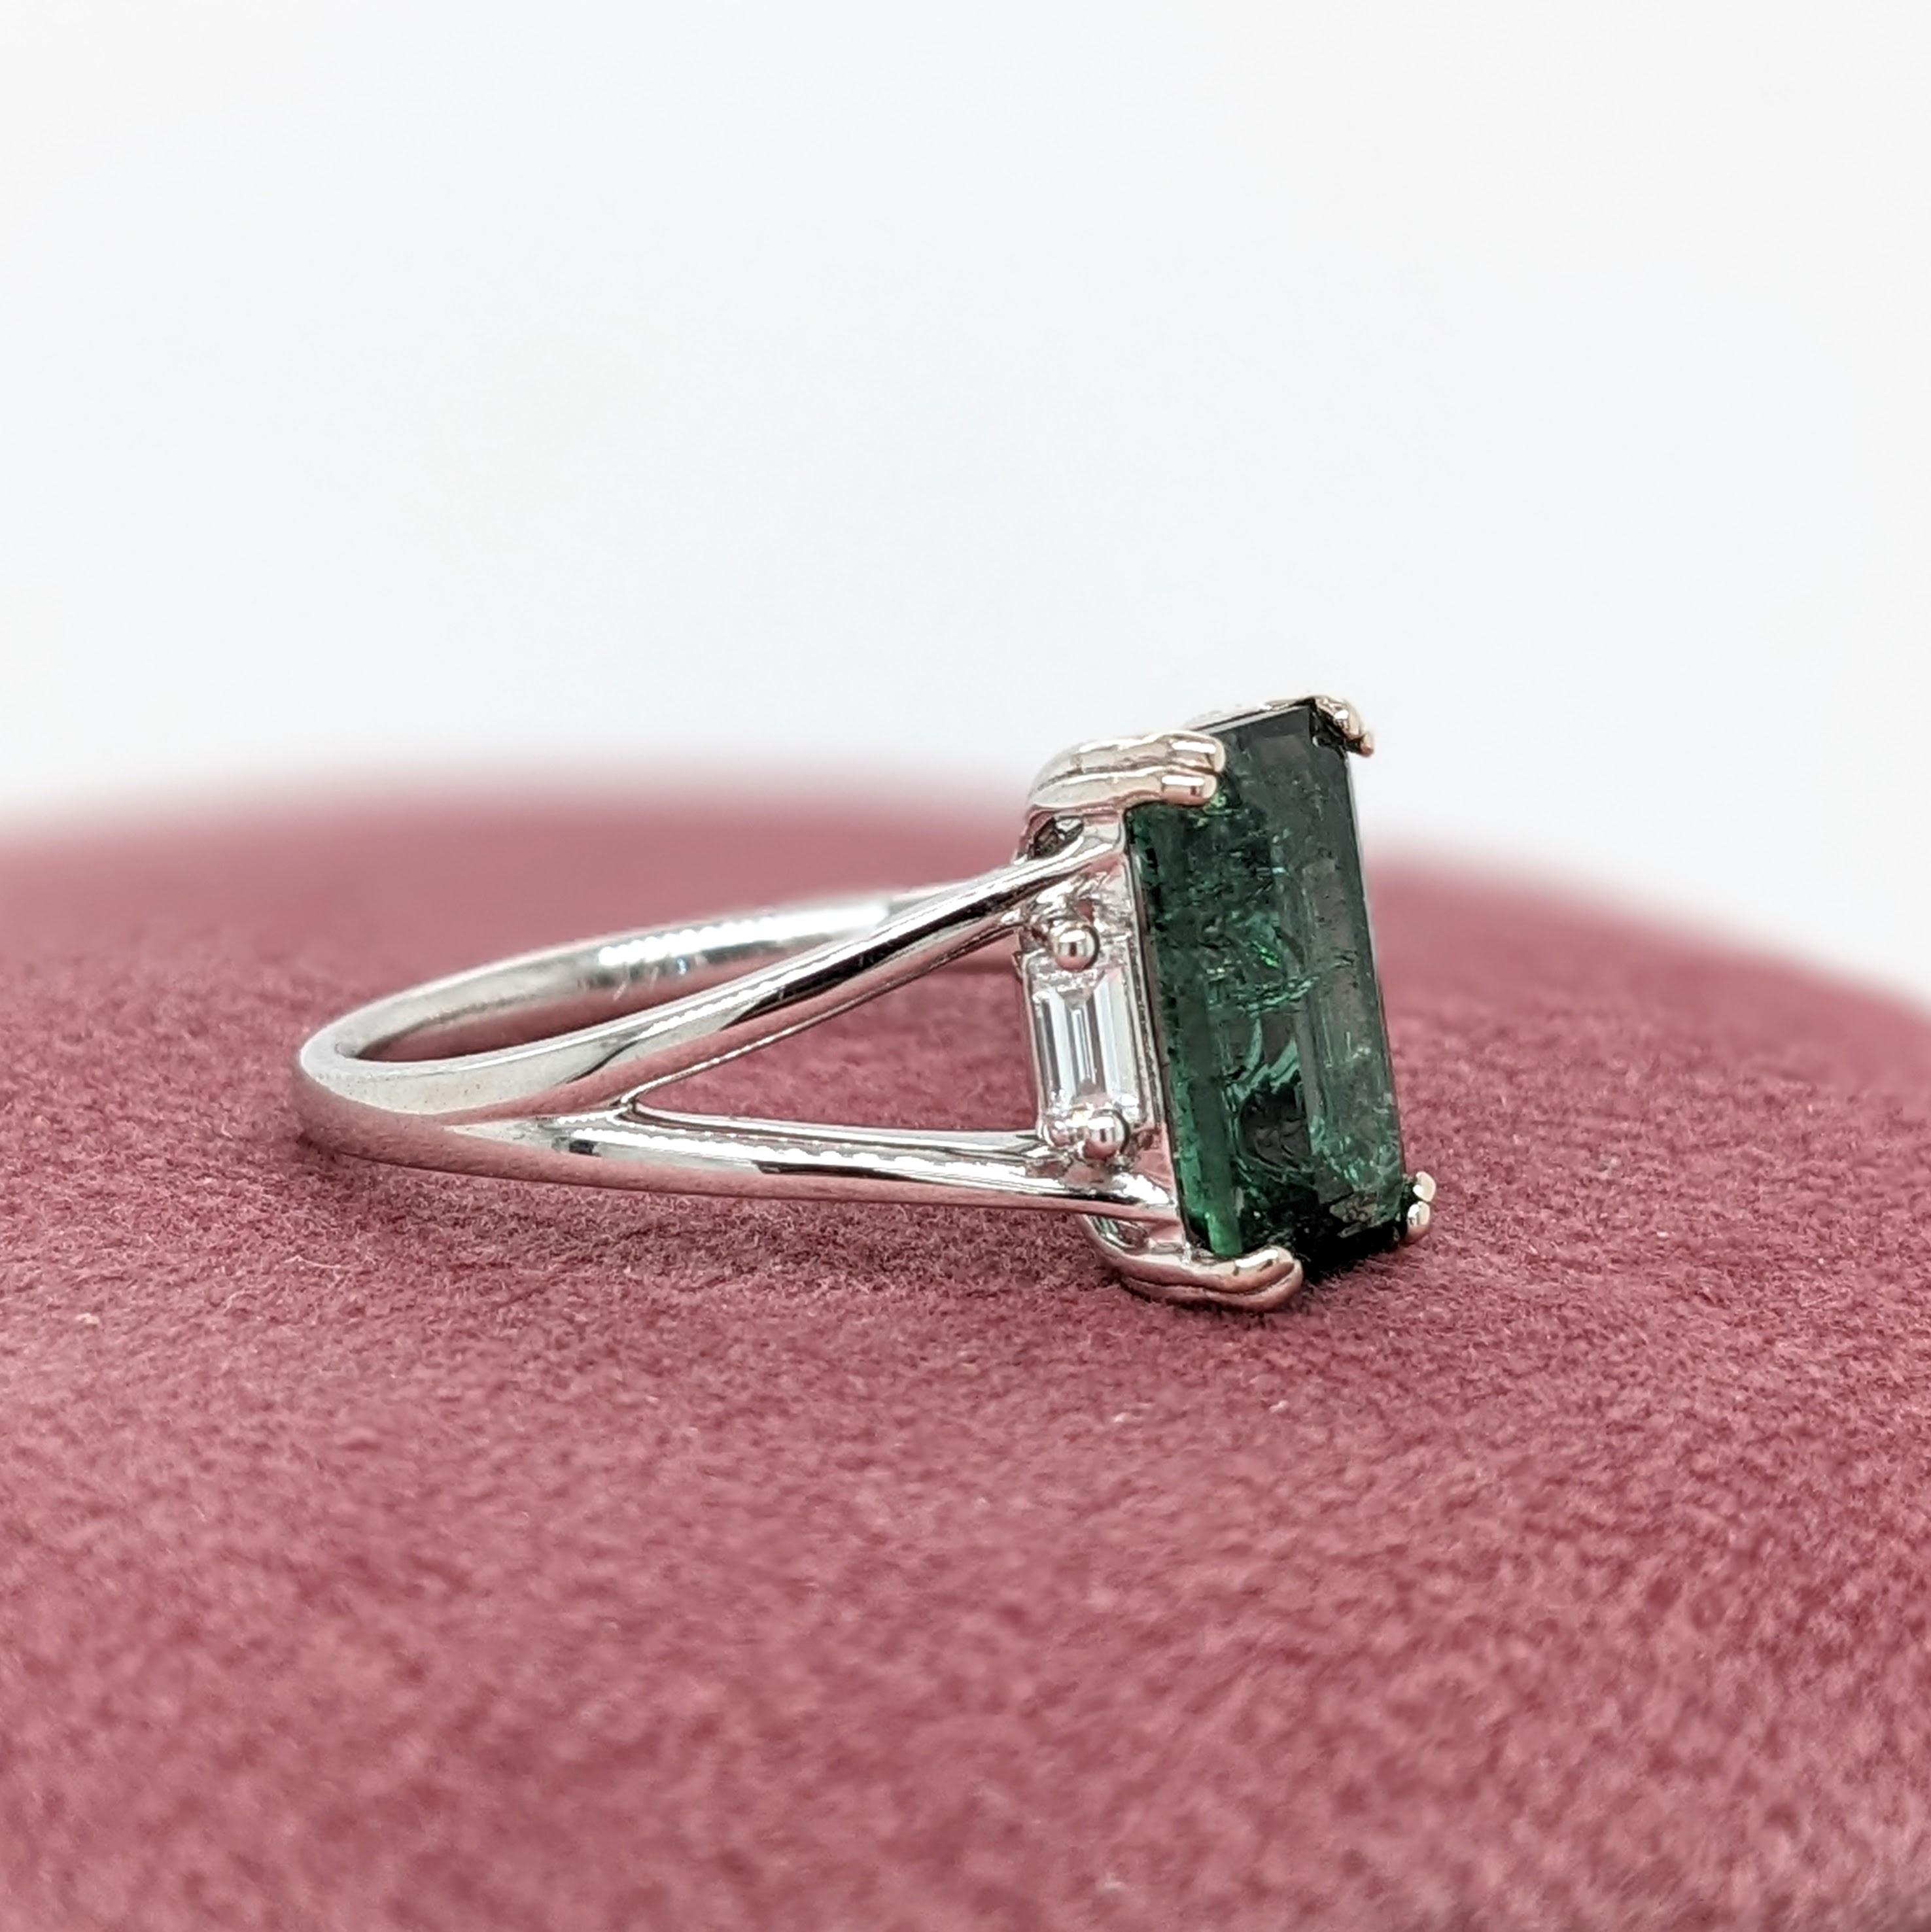 2.57ct Tourmaline w Diamond Accents in 14K Solid White Gold Emerald Cut 10x6mm For Sale 1